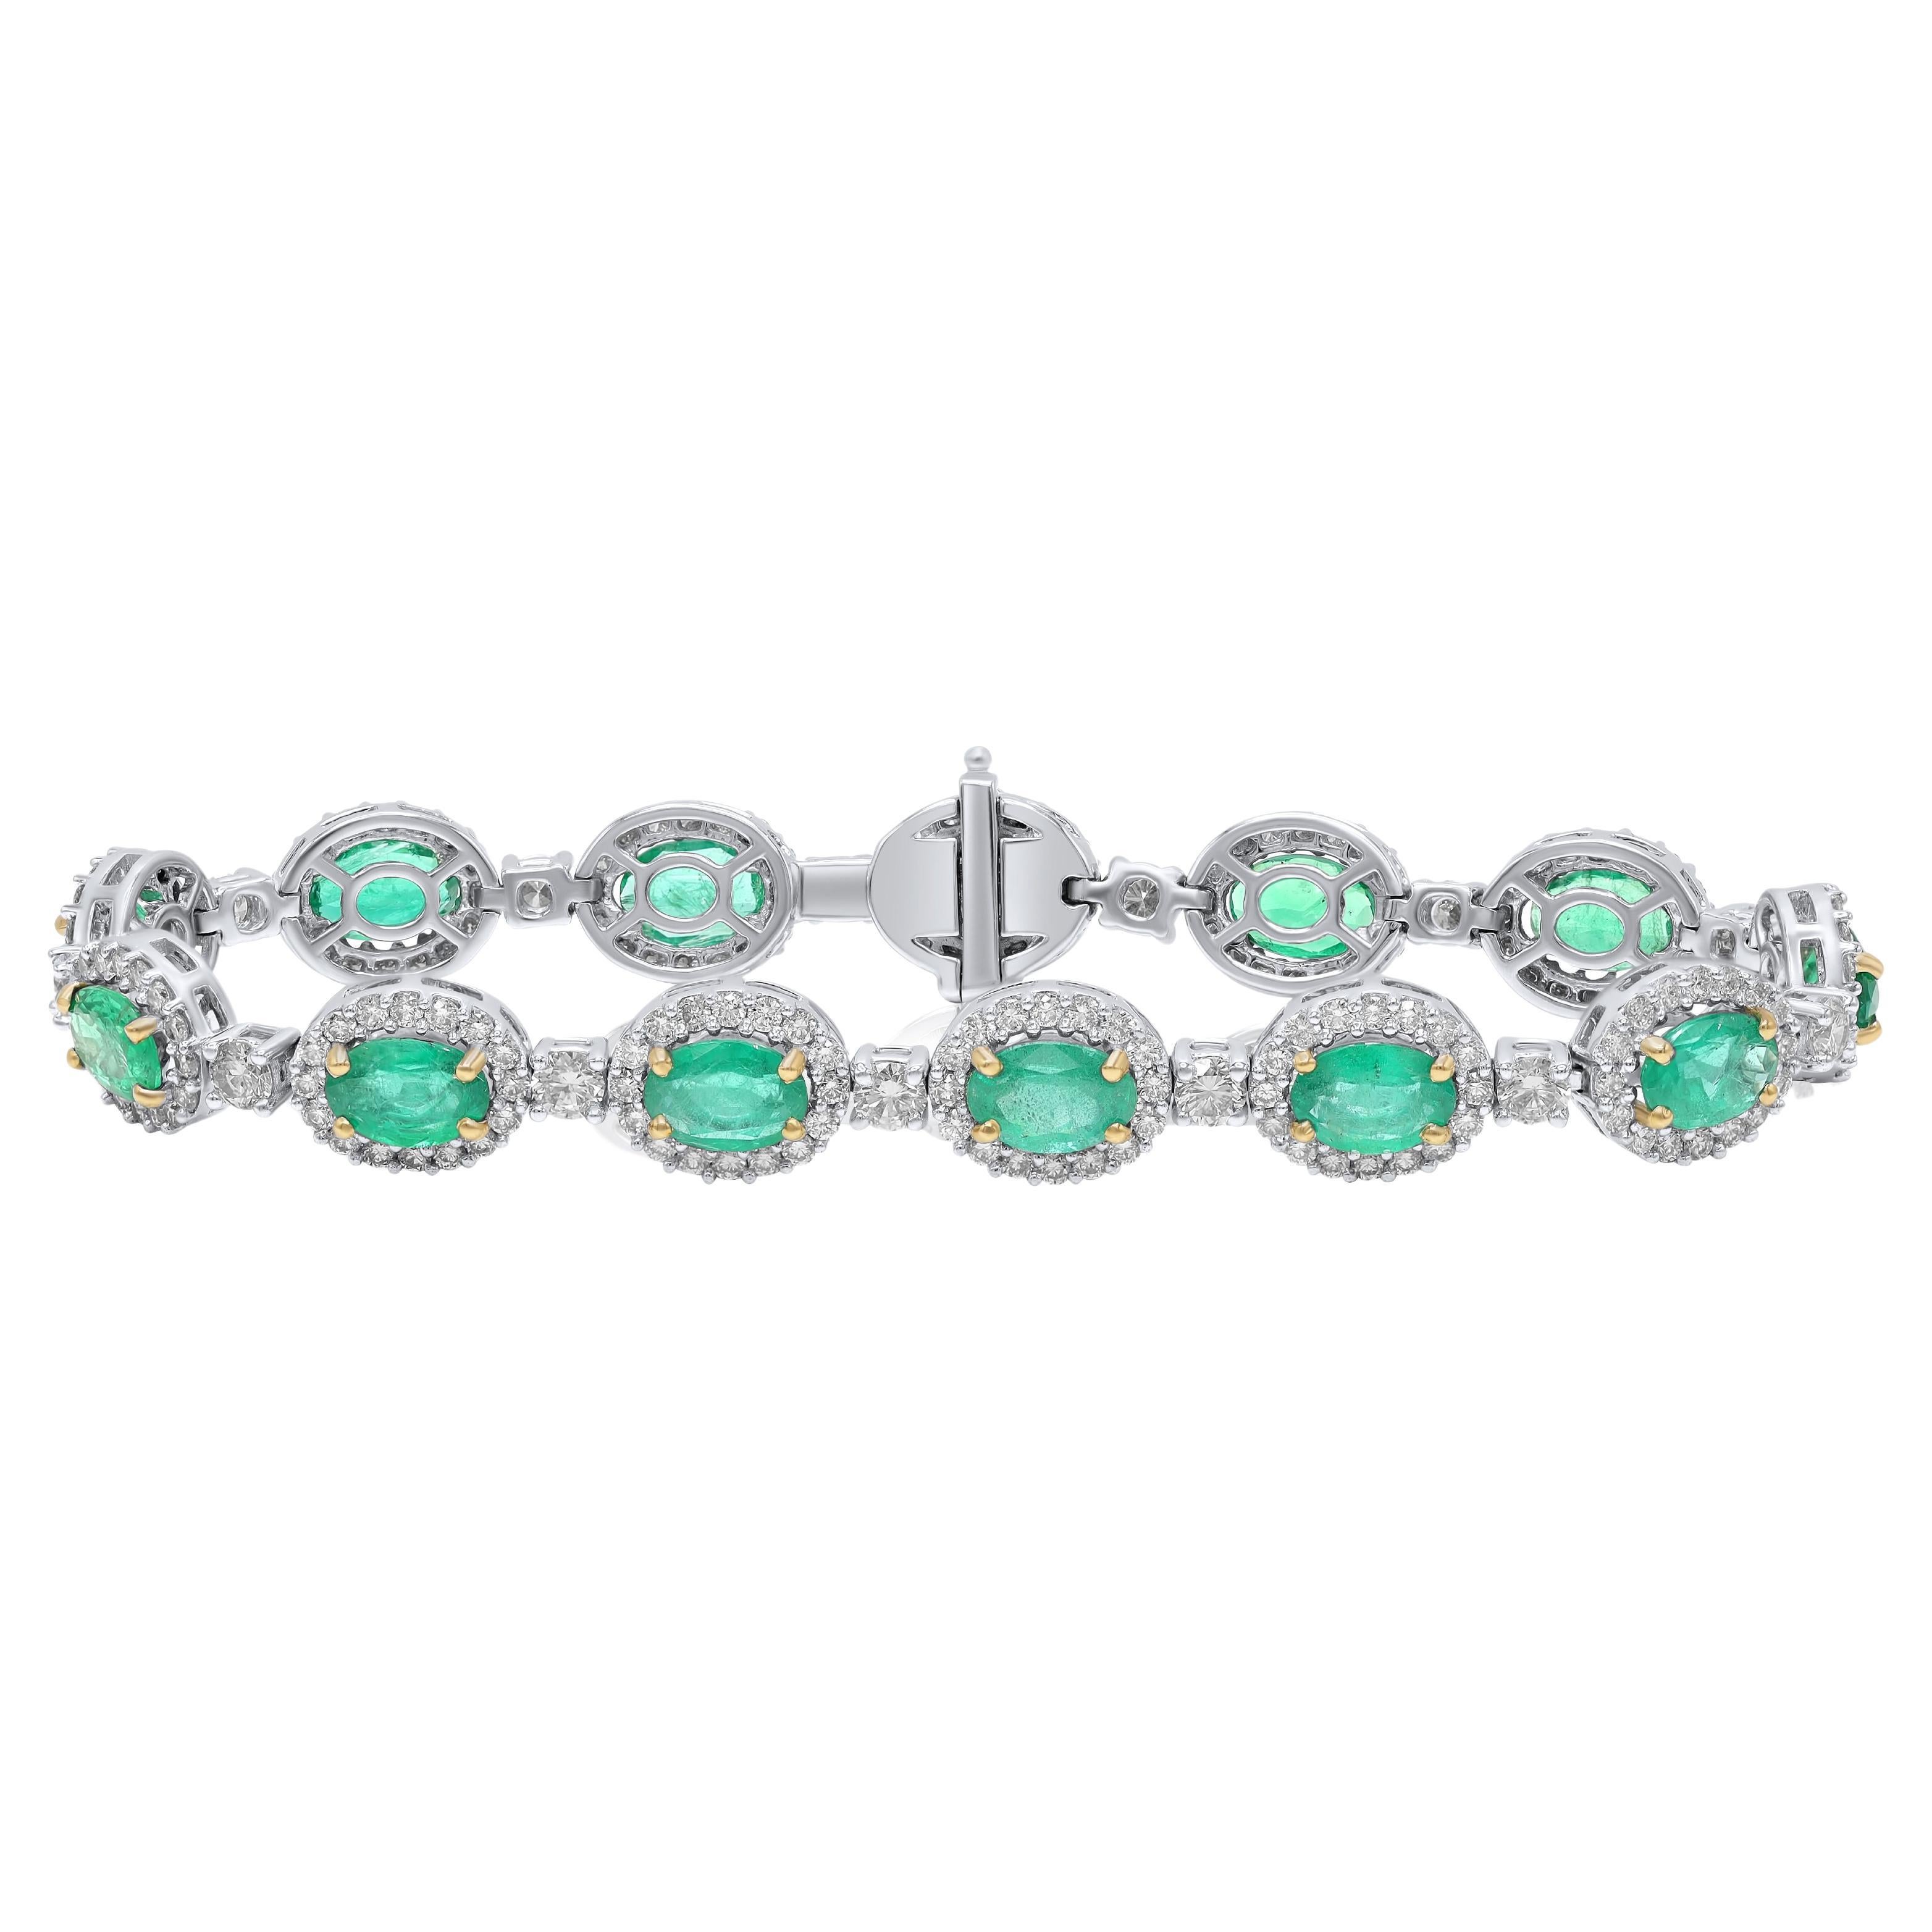 Diana M. 8.01 Carat Emerald and Diamond Bracelet in White Gold For Sale